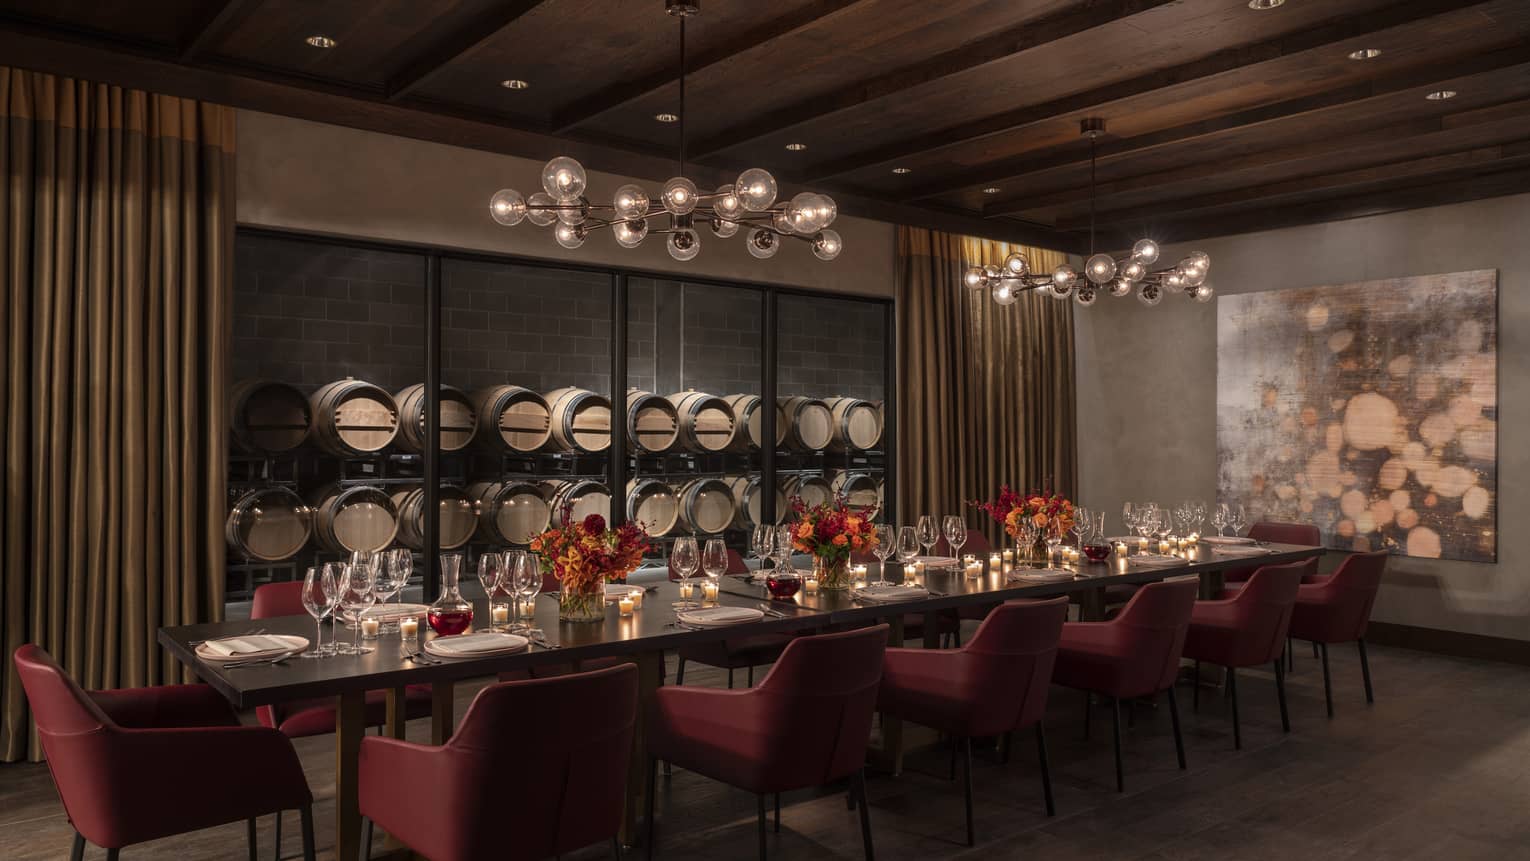 Private dining room, long table with 14 chairs, wooden ceiling, wine barrels